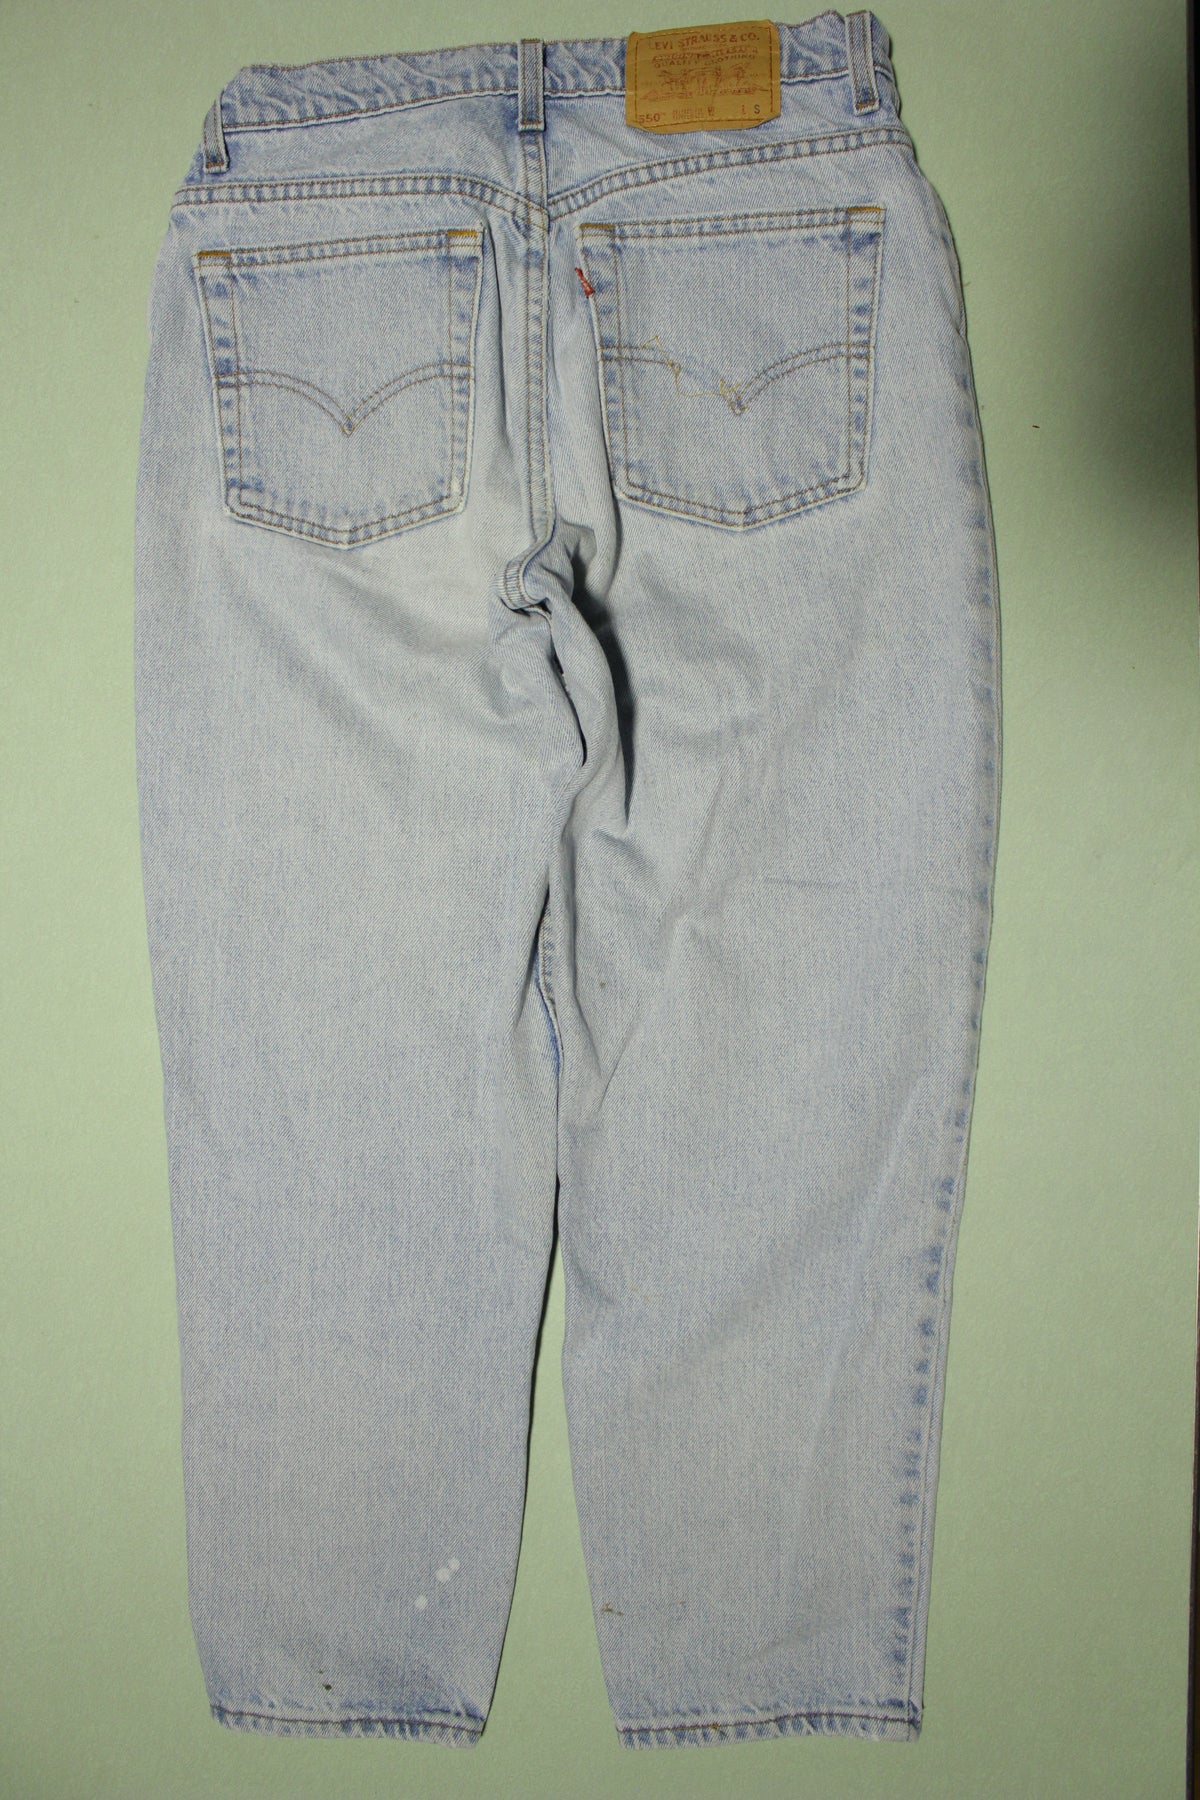 Levis 550 Tapered Leg Stone Washed 90s Made IN USA Womens Denim Jeans